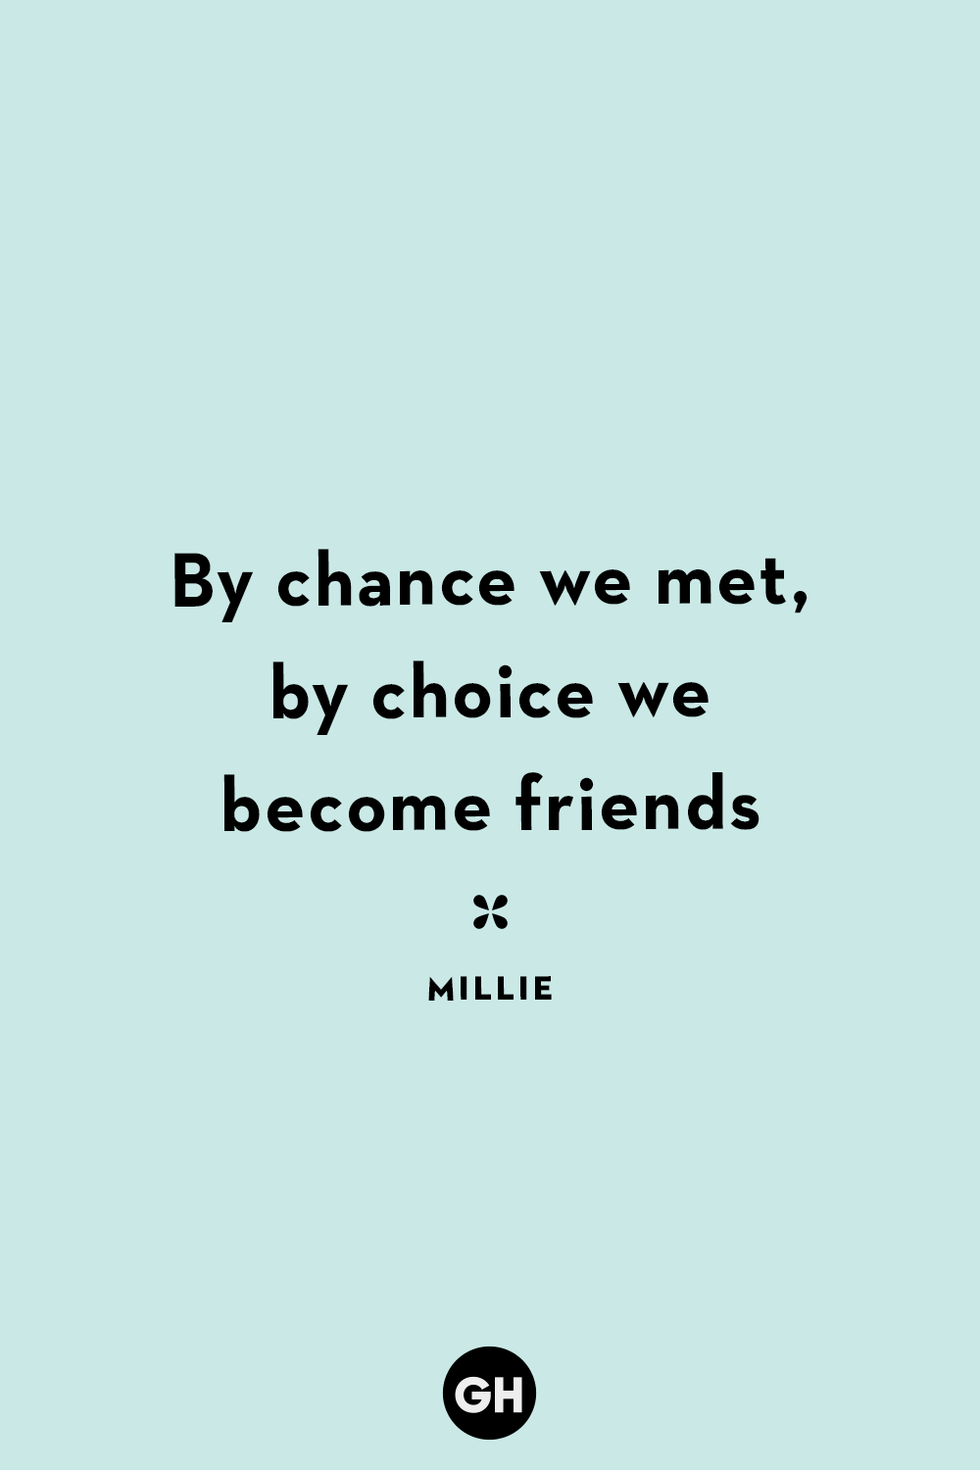 My Coolest Quotes: We Met Online, Had a Good Time